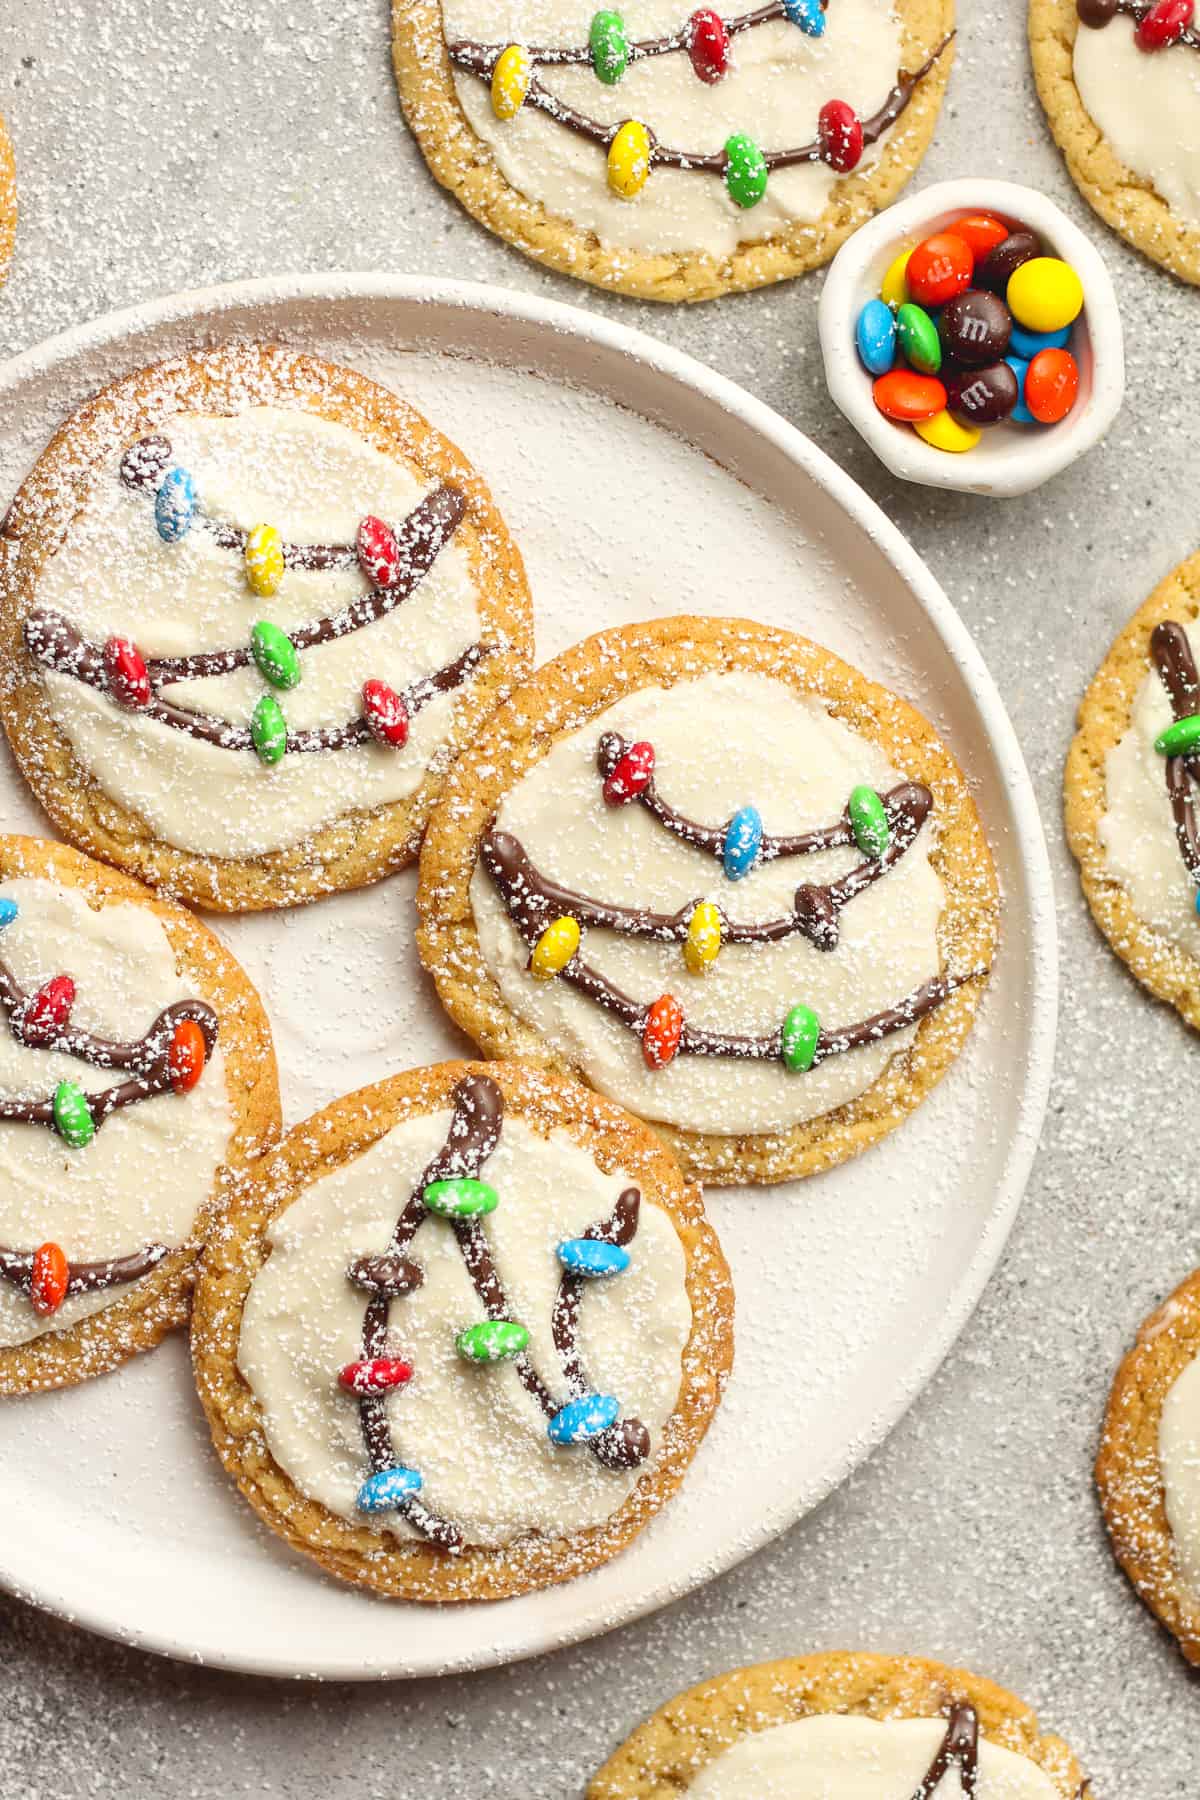 A partial plate of Christmas lights decorated on sugar cookies.